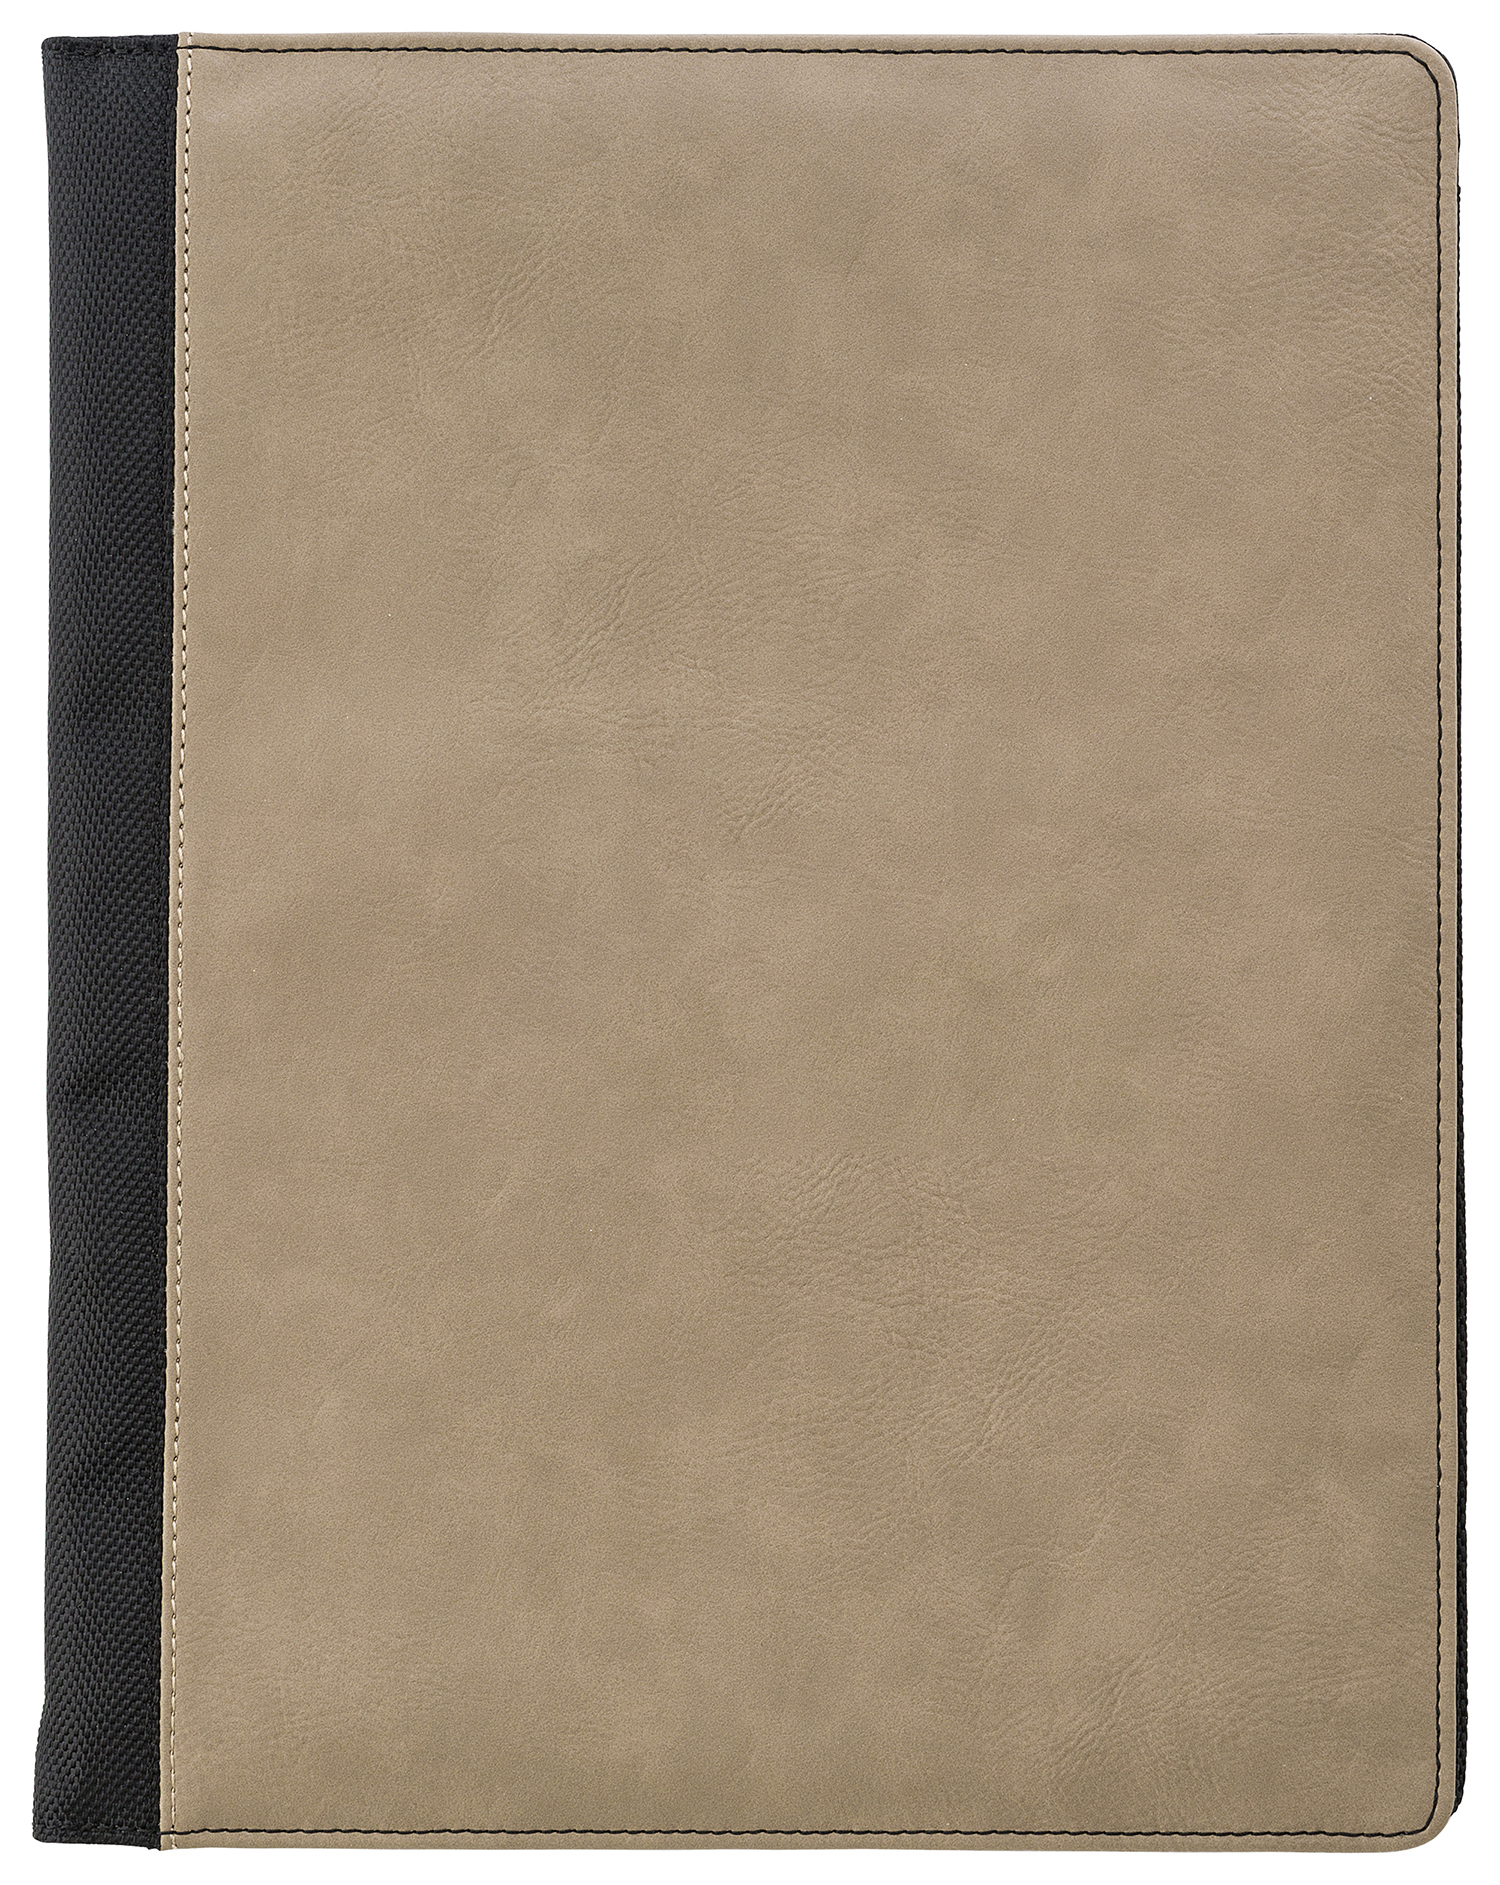 Promotional A4 Pad folio with PU cover, a large internal pocket, one smaller sewed on pocket, an elasticated pen loop, and a 50 page lines note pad. 